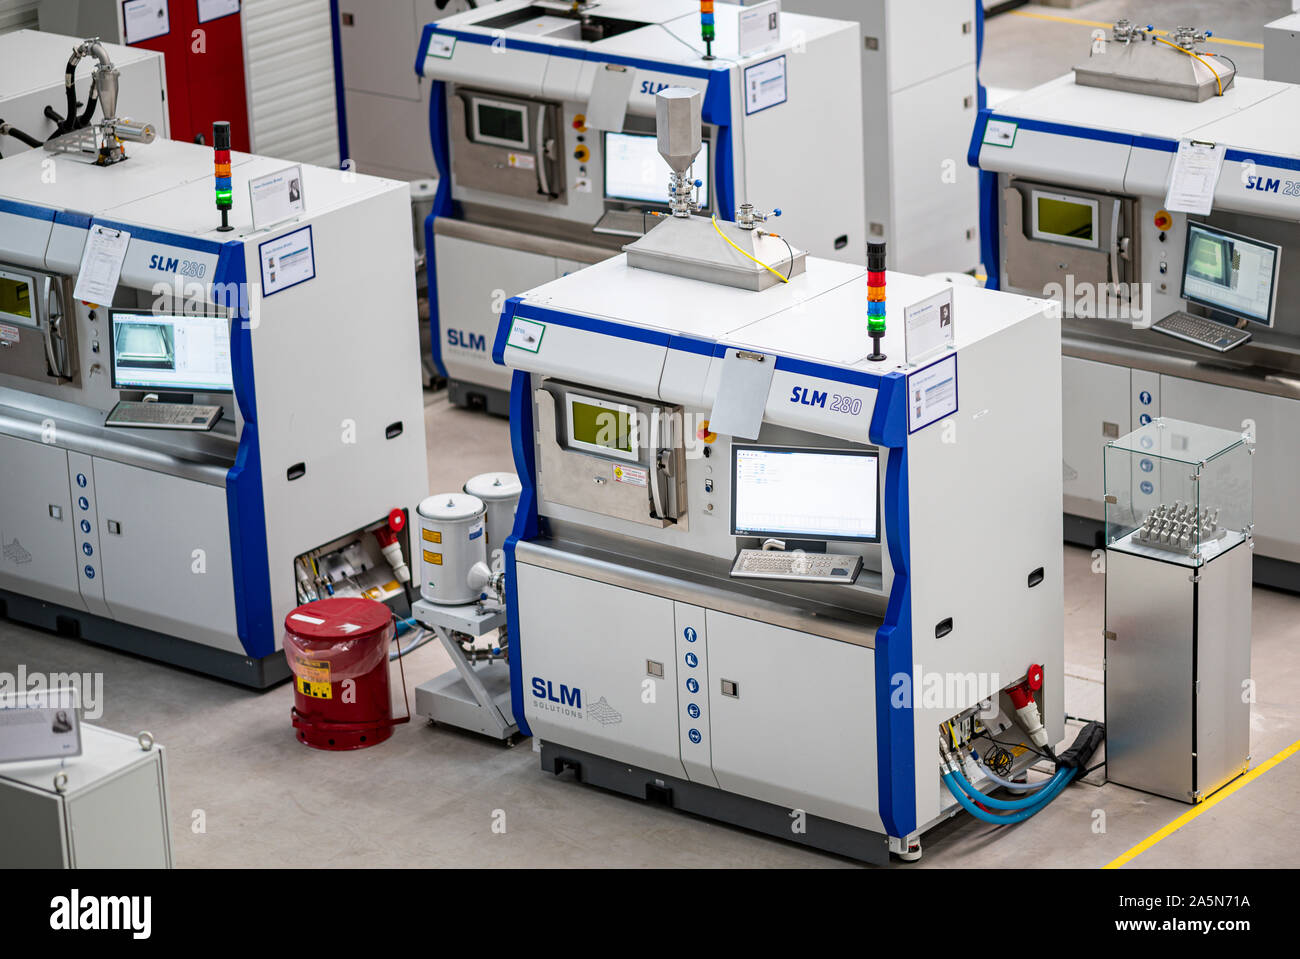 02 October 2019, Schleswig-Holstein, Lübeck: 3D printers are located in the workshop of the SLM Solutions Group. After a change at the top of the company, SLM wants to get back on track for success. Photo: Axel Heimken/dpa Stock Photo